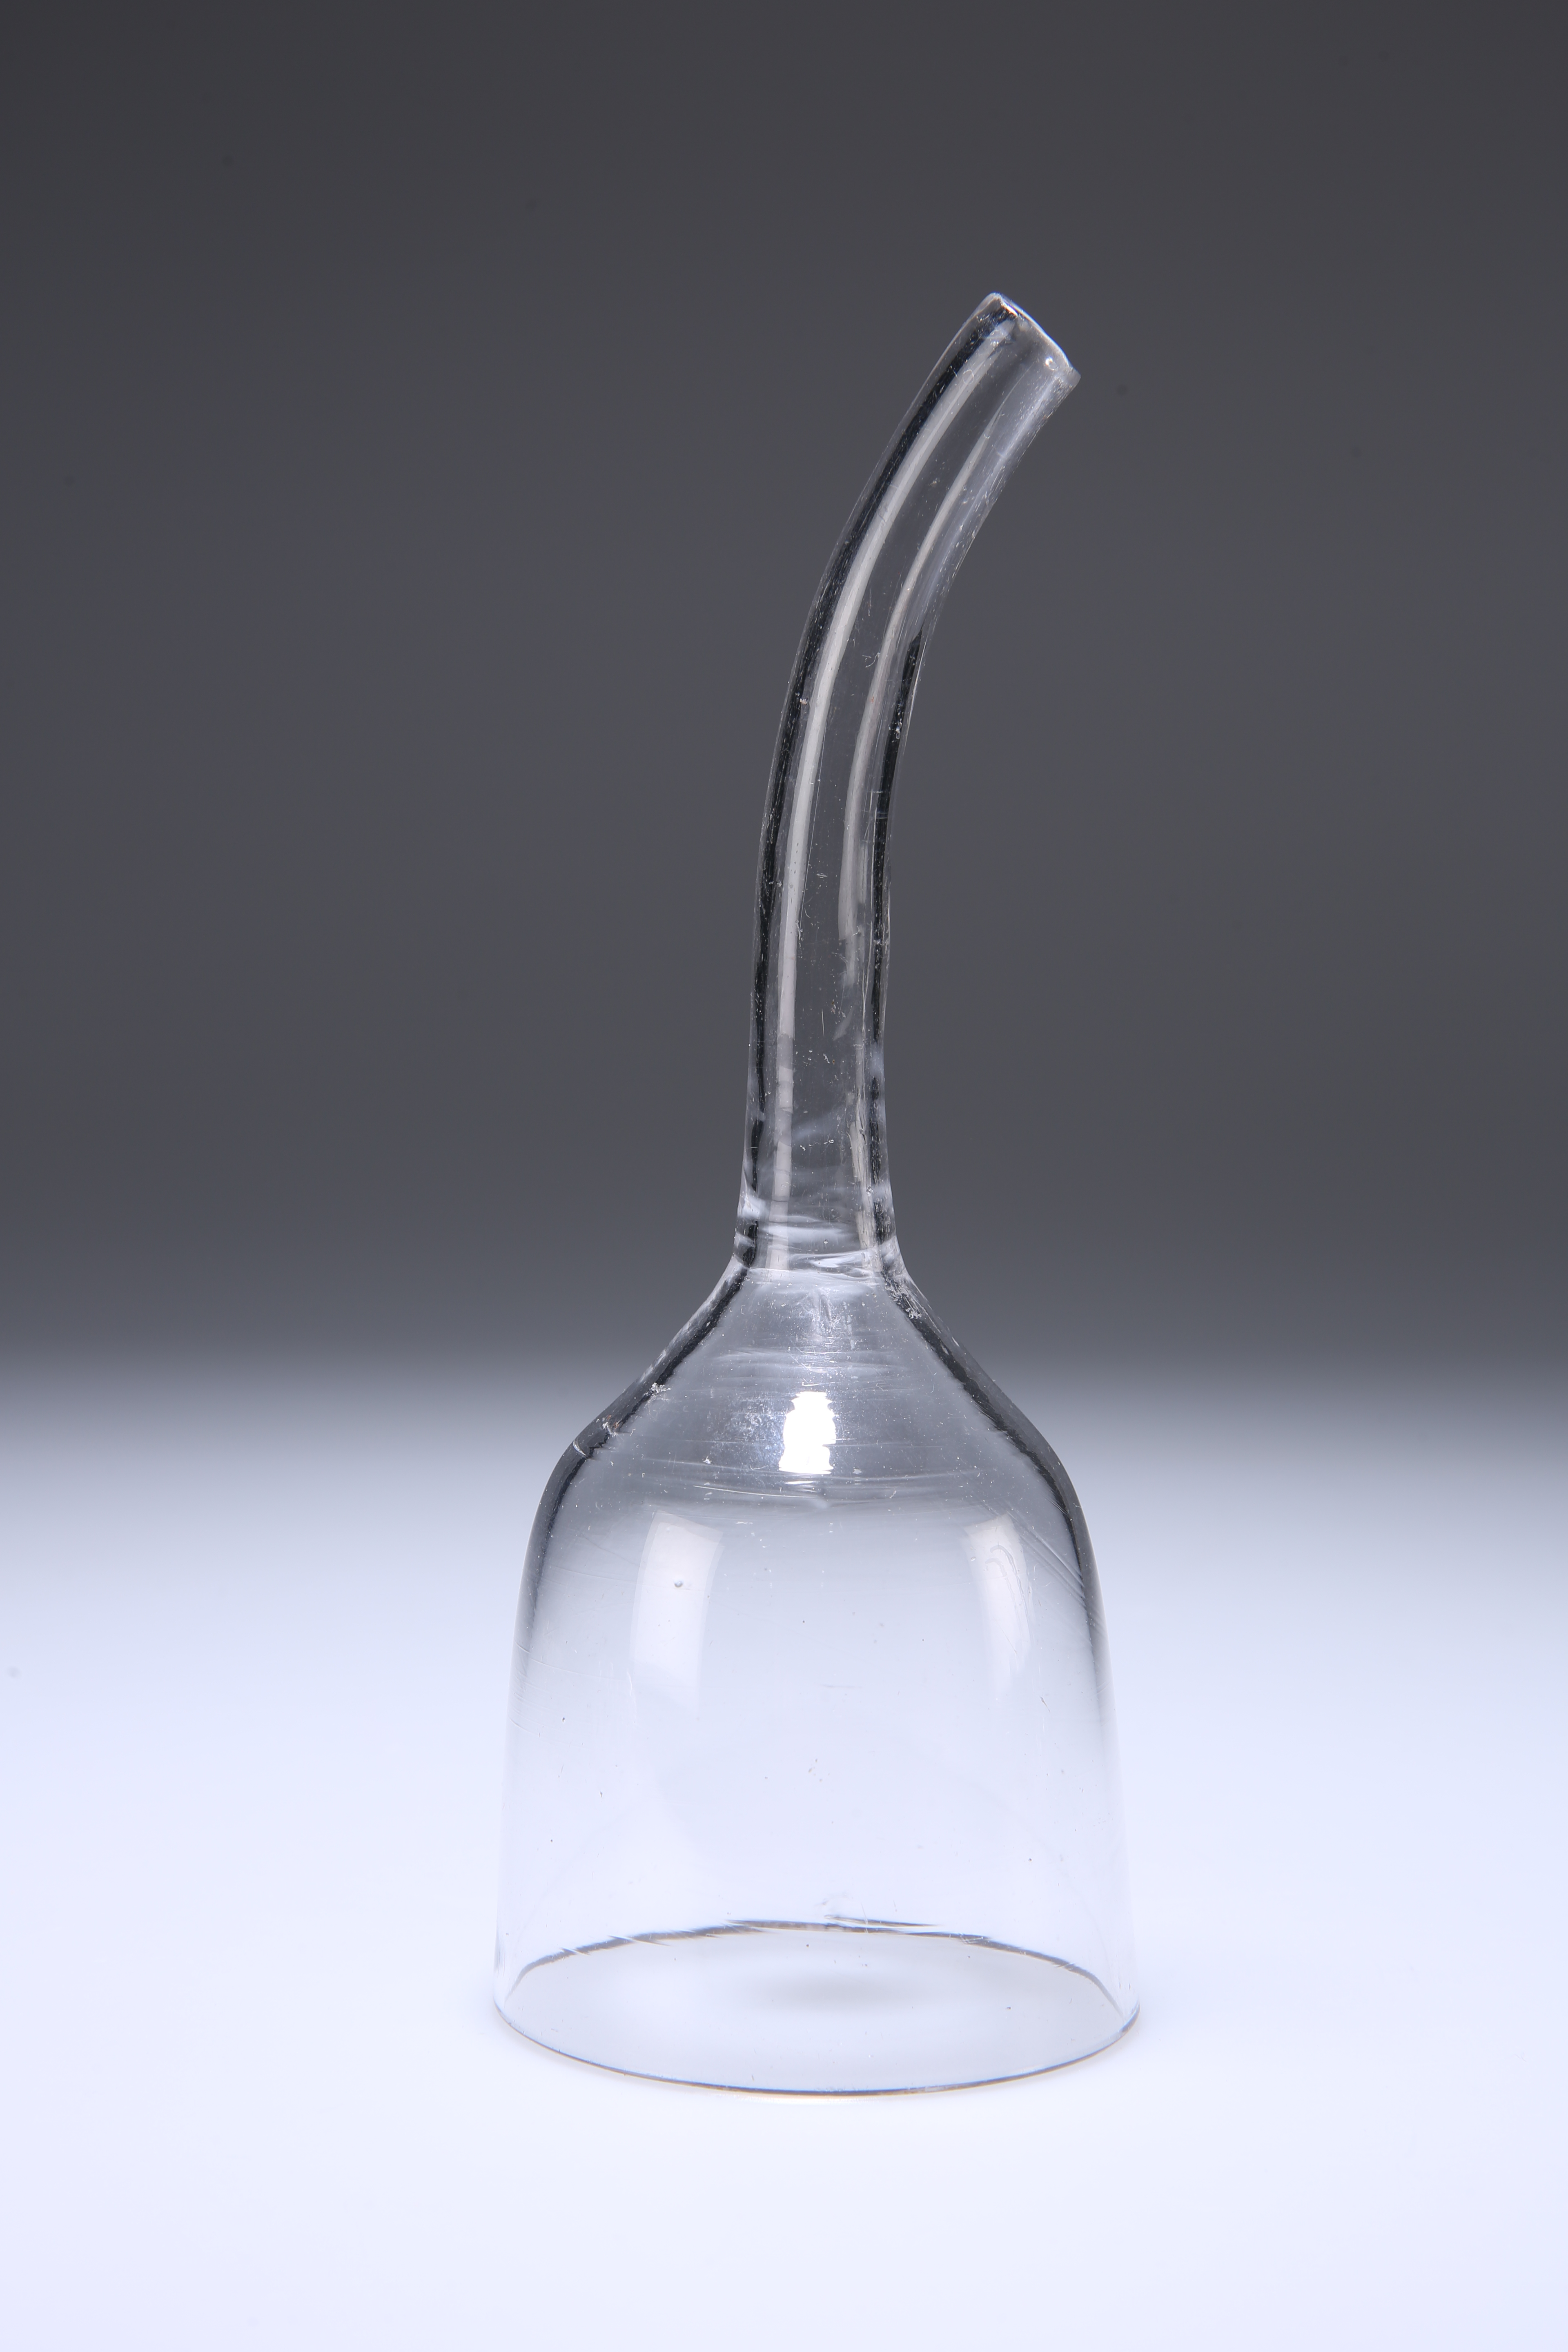 A RARE 18TH CENTURY GLASS WINE FUNNEL, with cranked spout